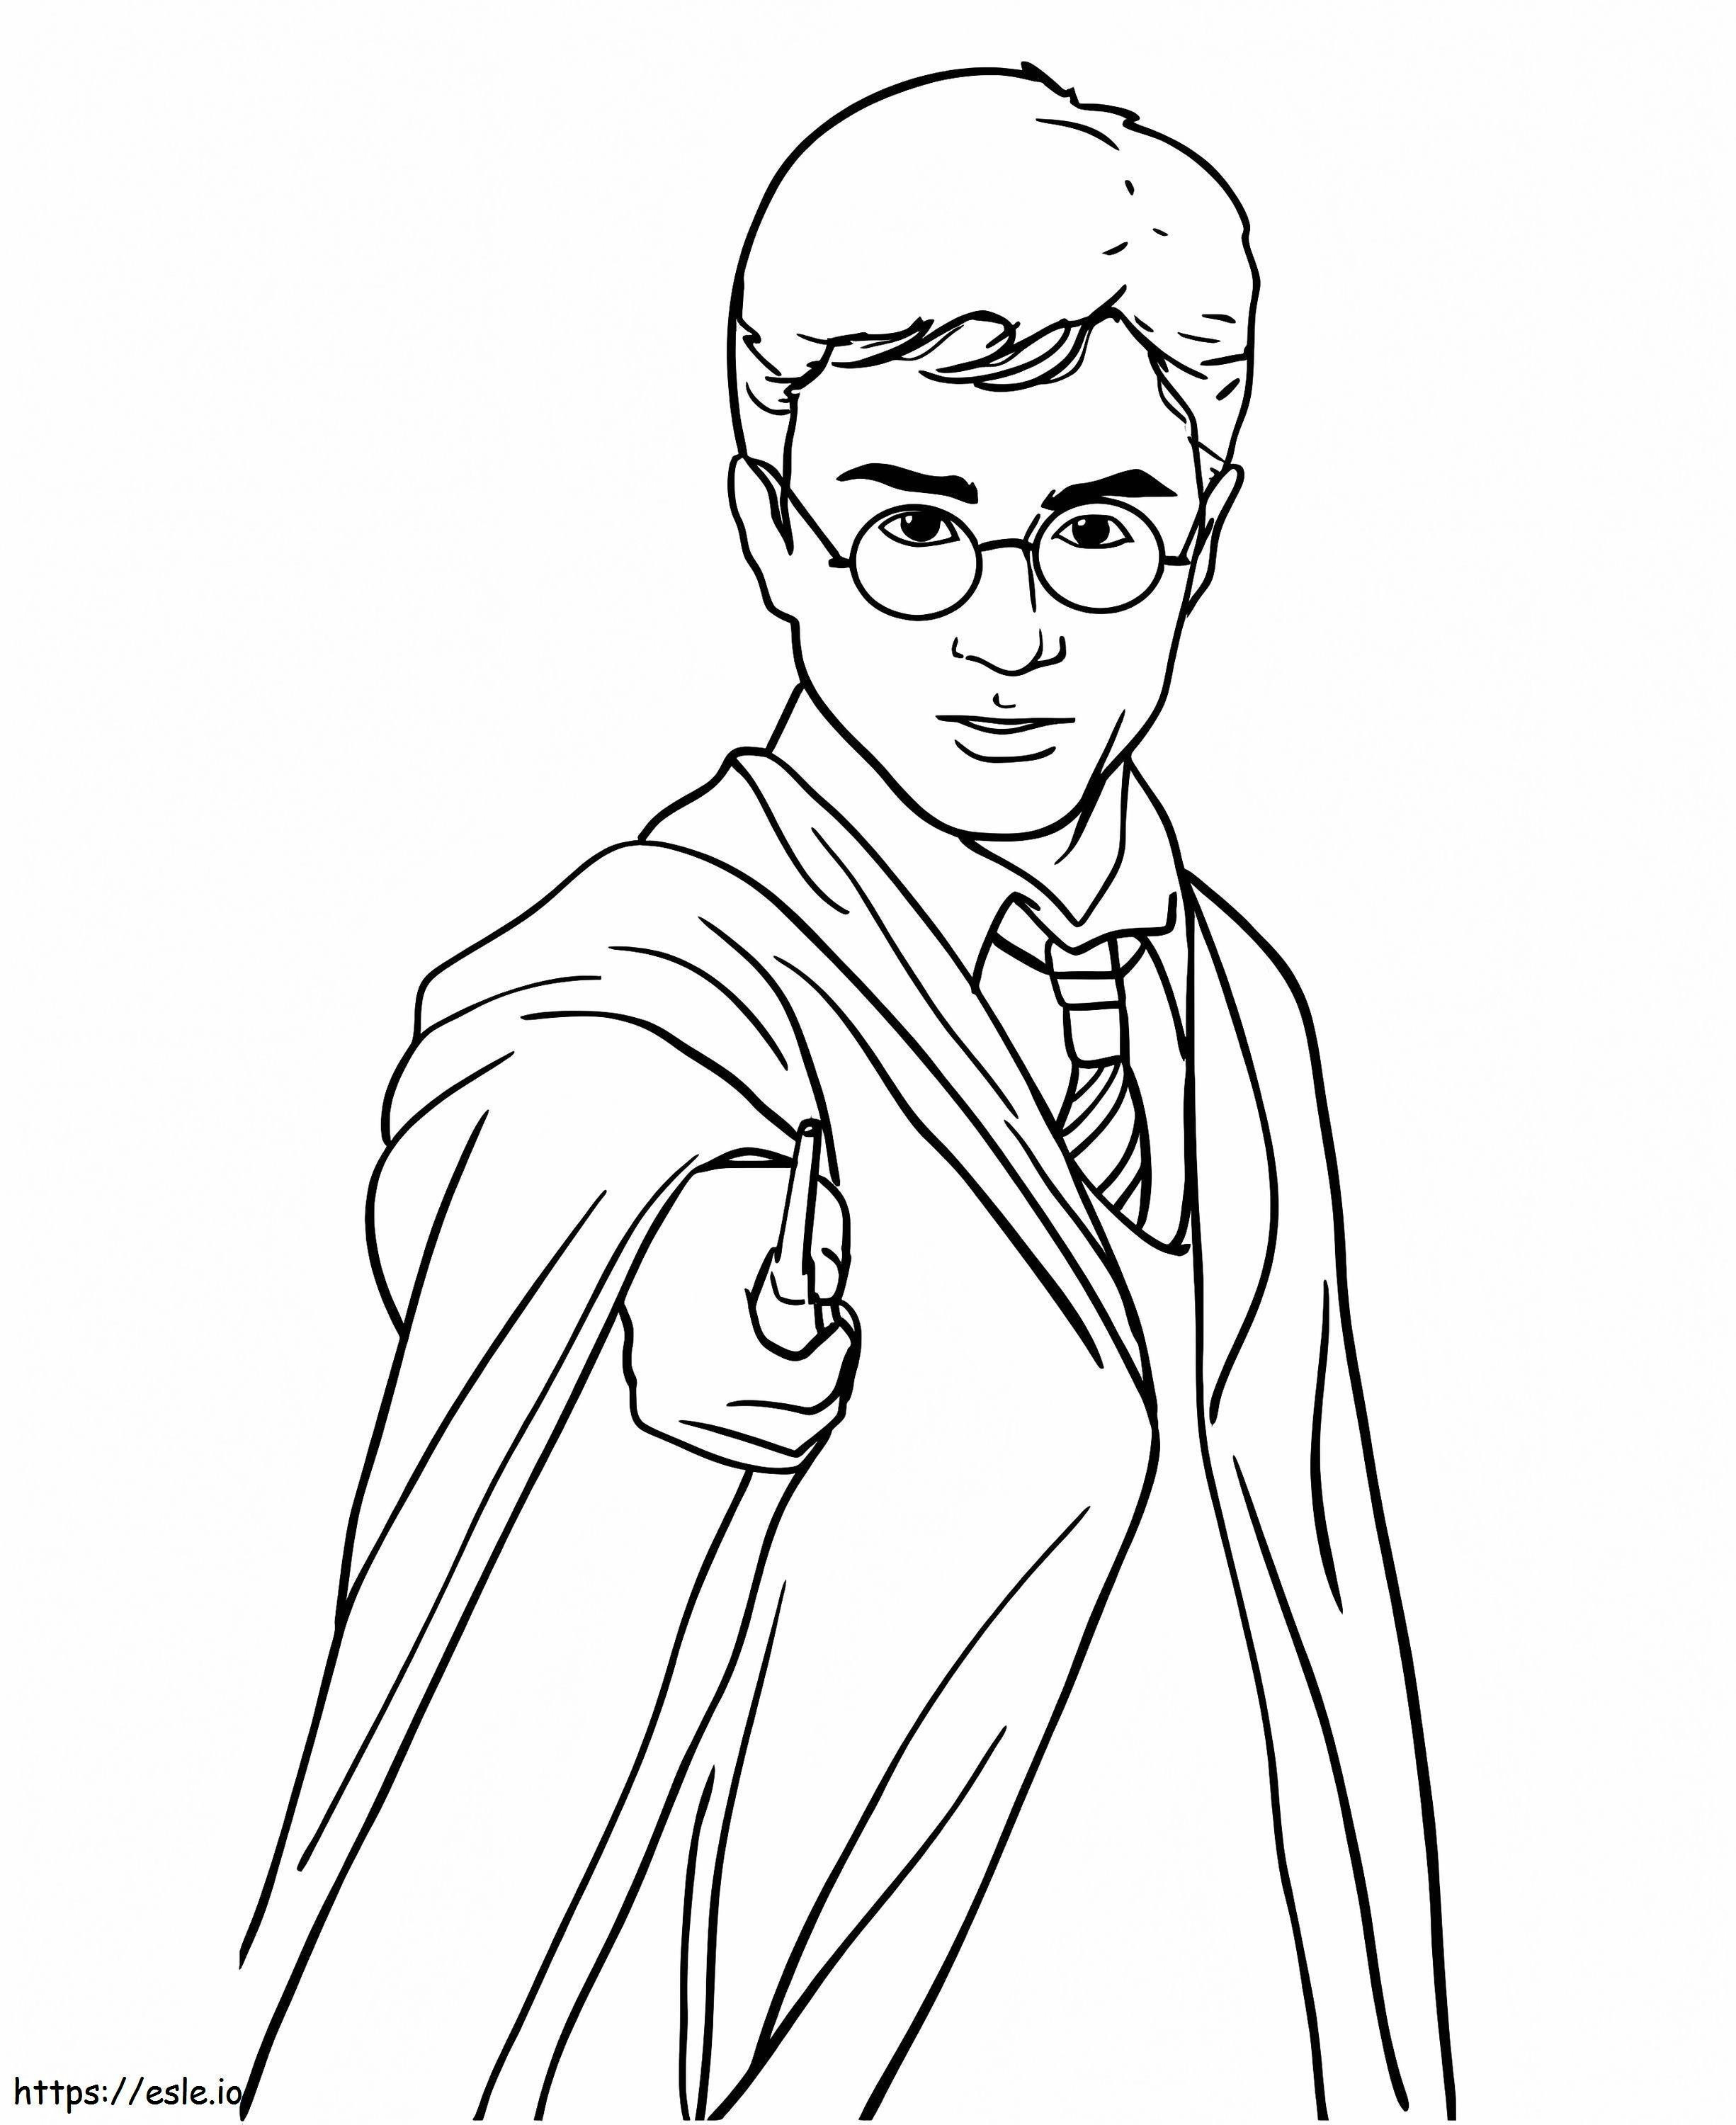 Basic Harry Potter coloring page